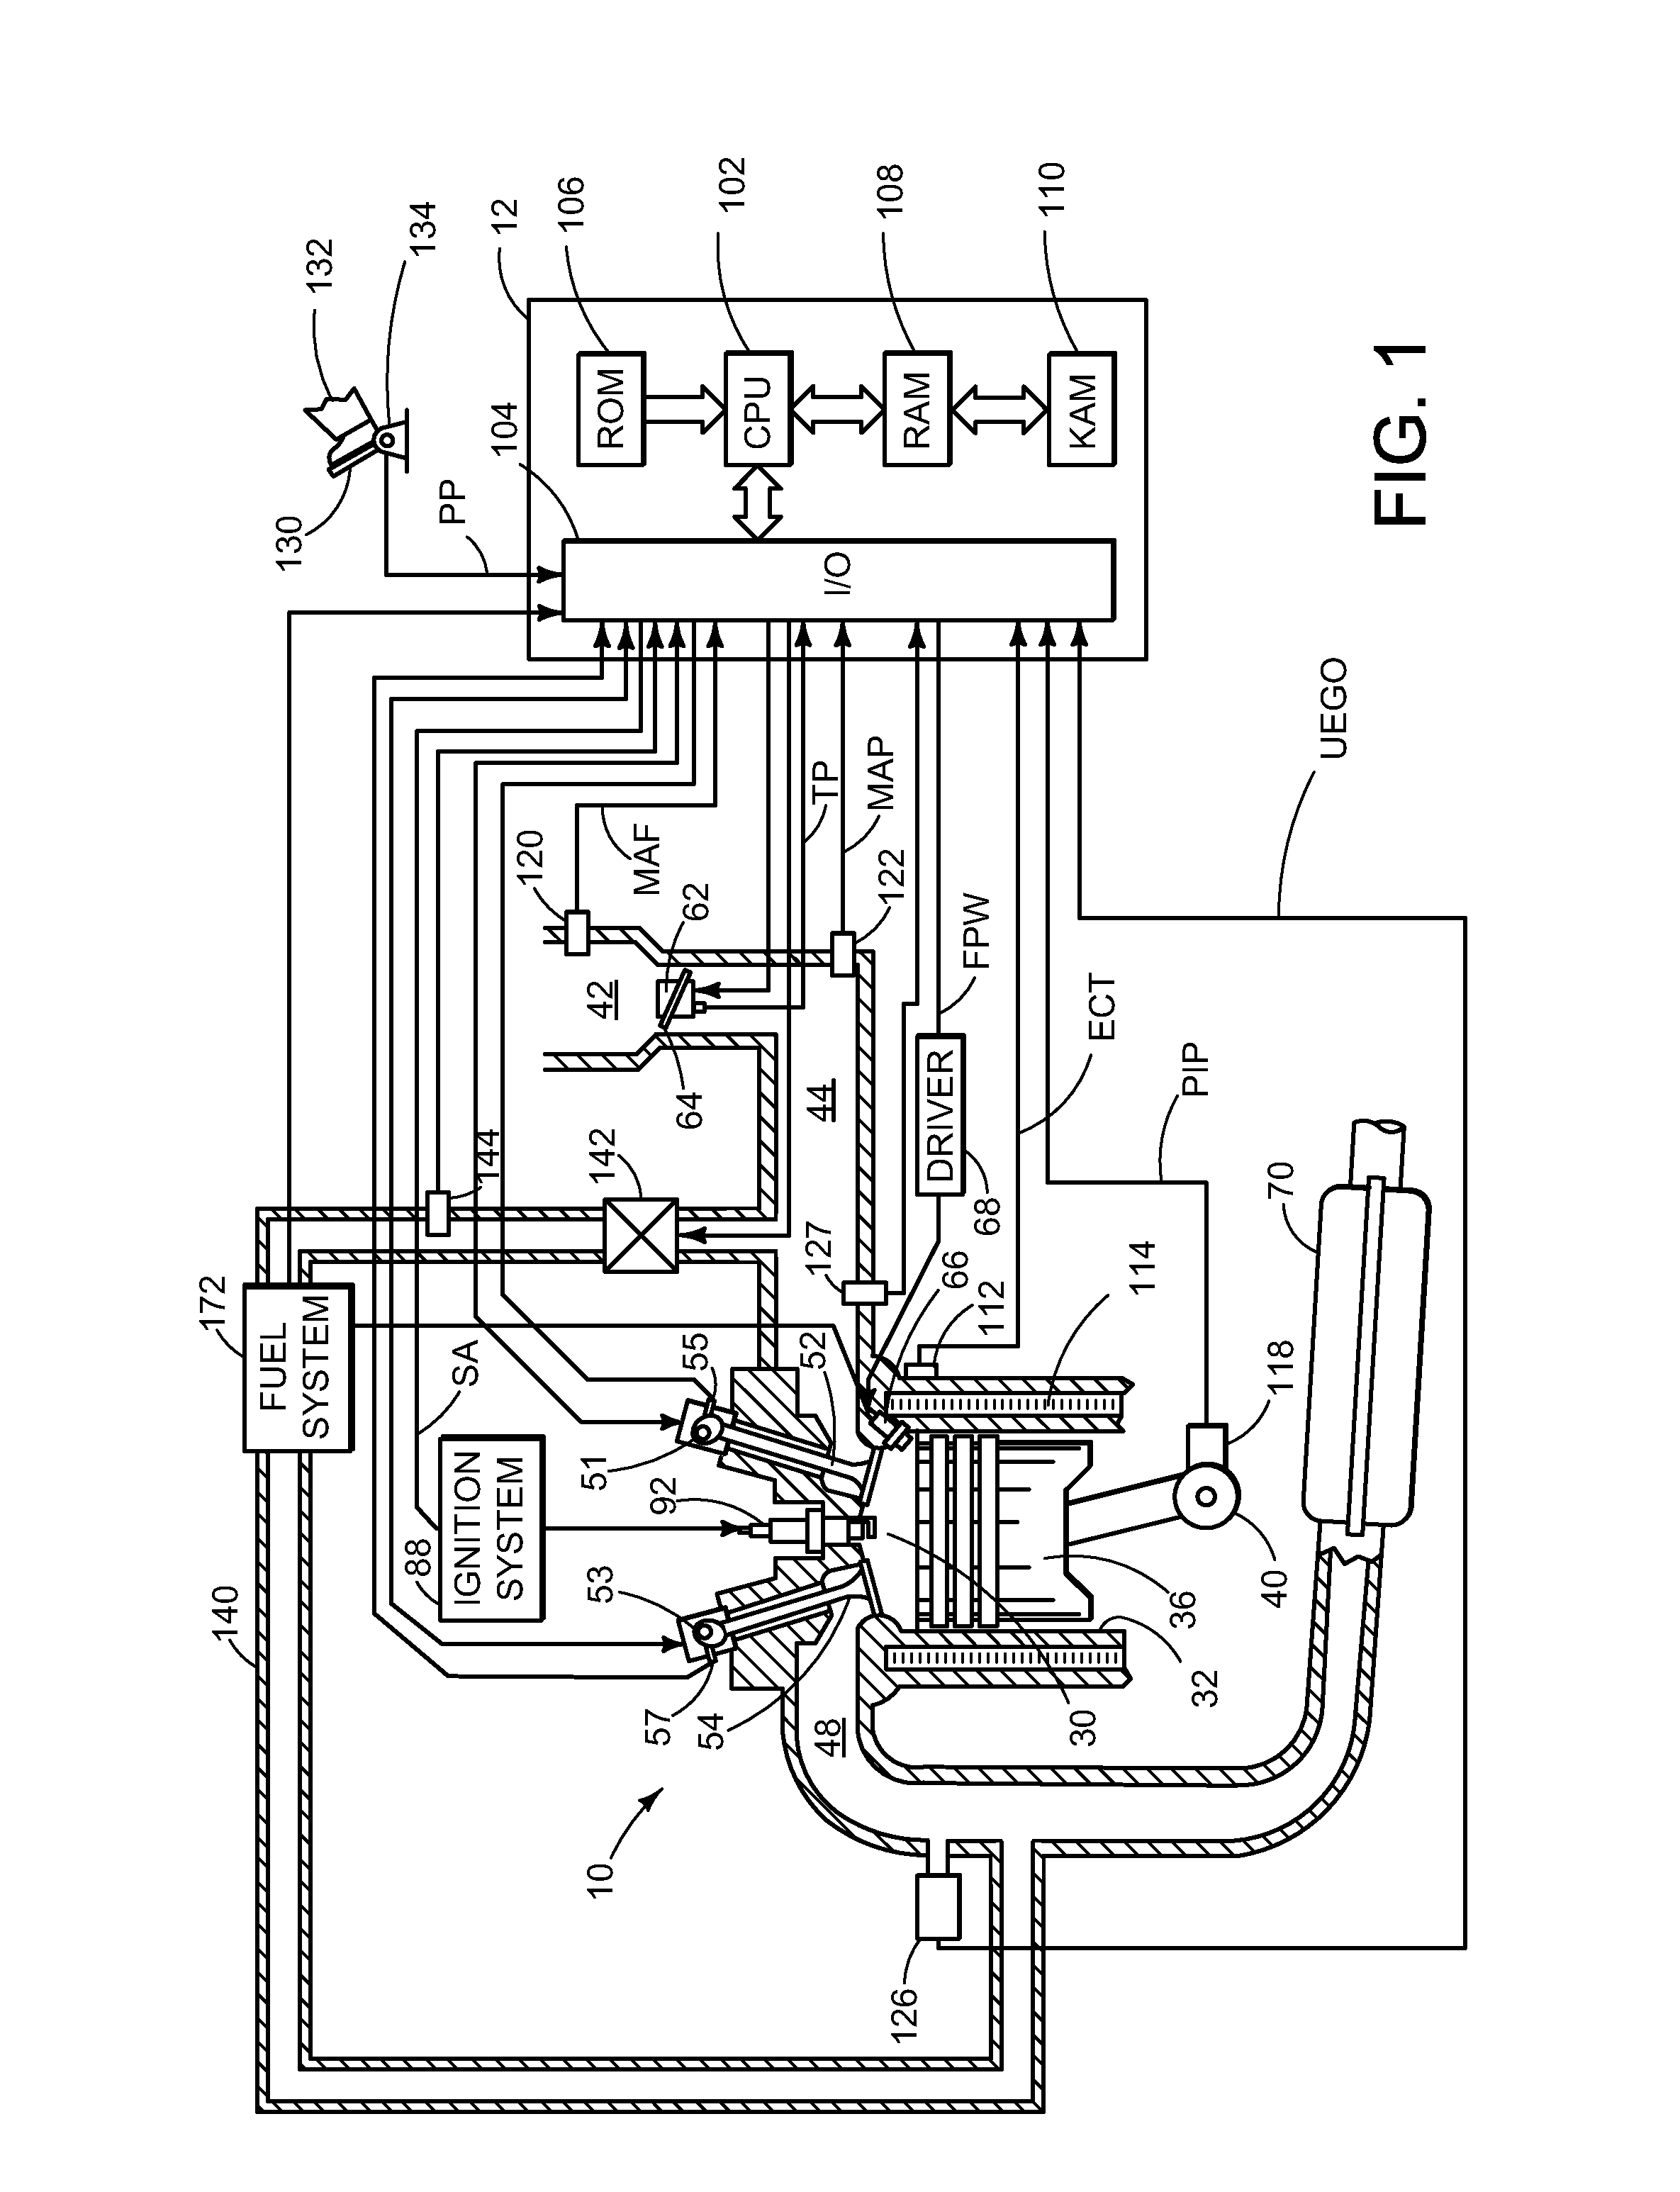 Methods and systems for fuel ethanol content determination via an oxygen sensor